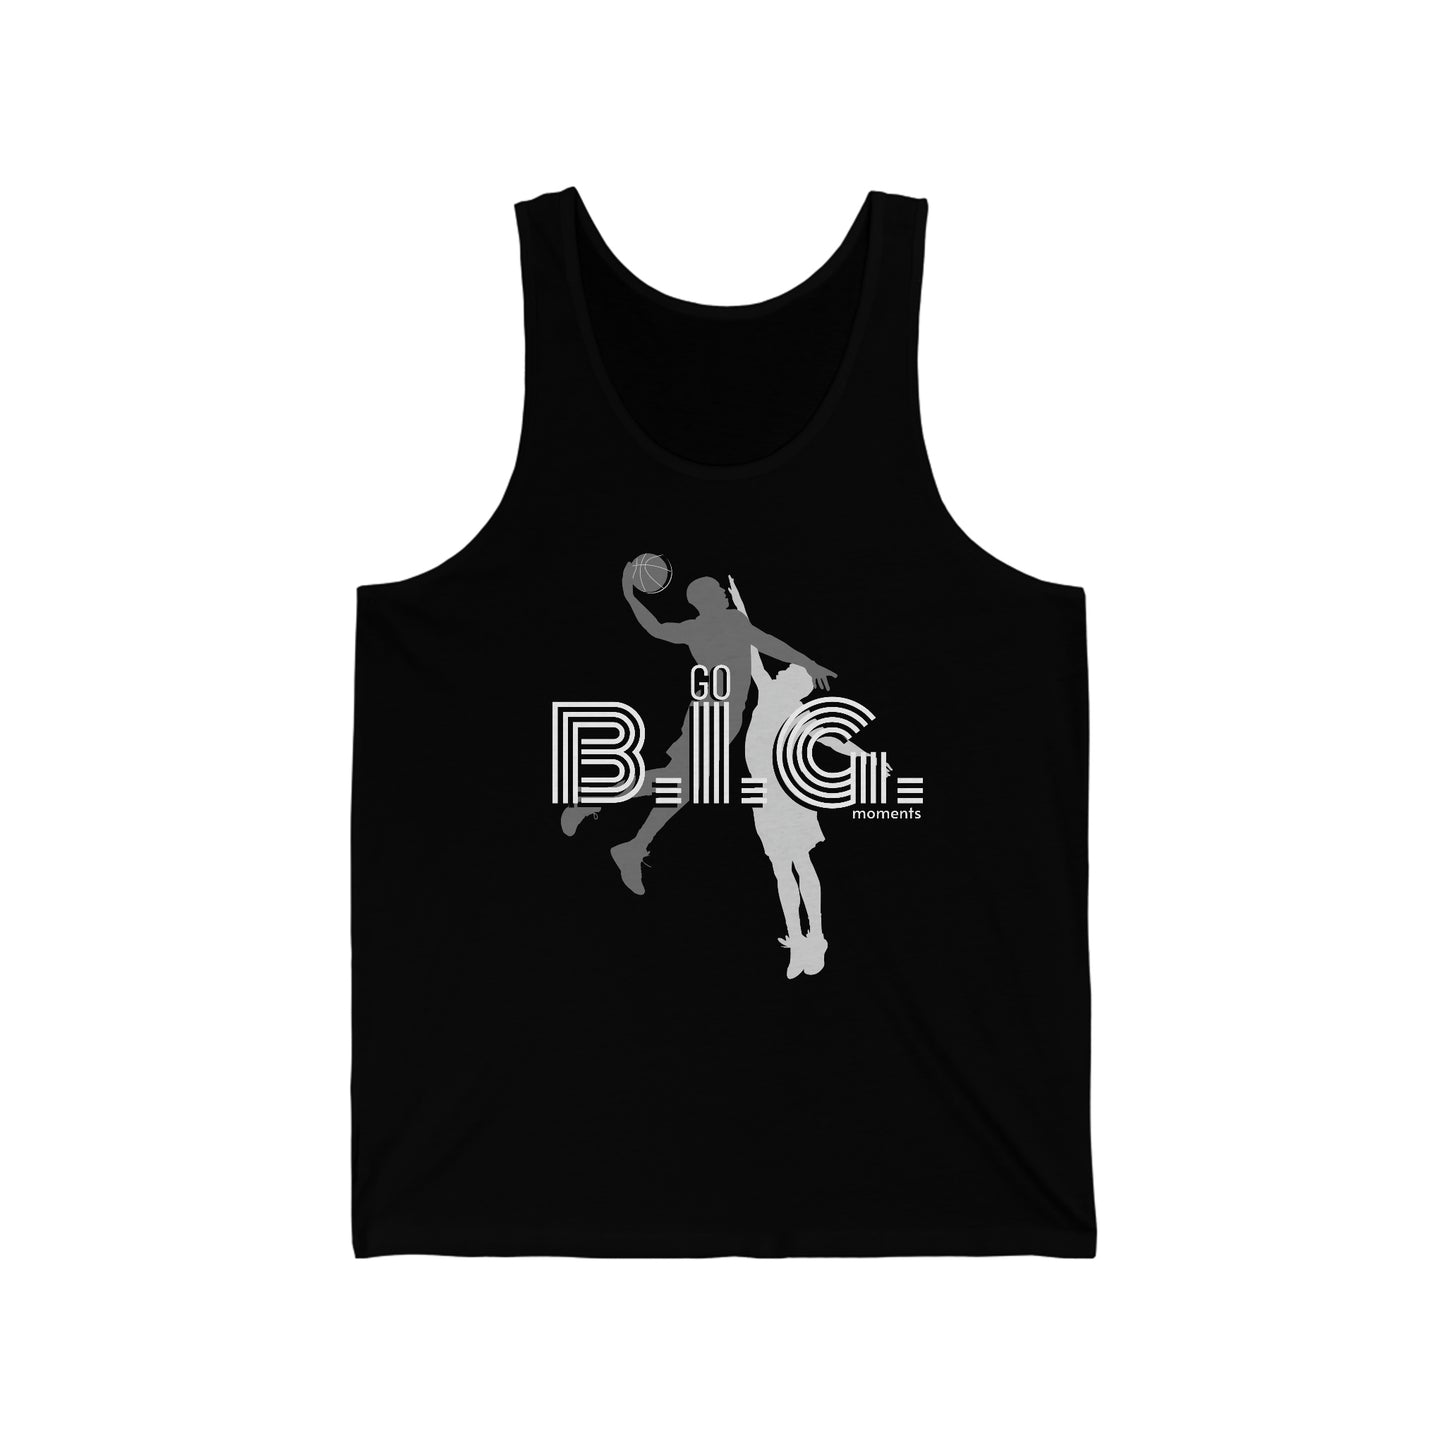 Unisex Jersey Tank, GO B.I.G. - BASKETBALL fly or die